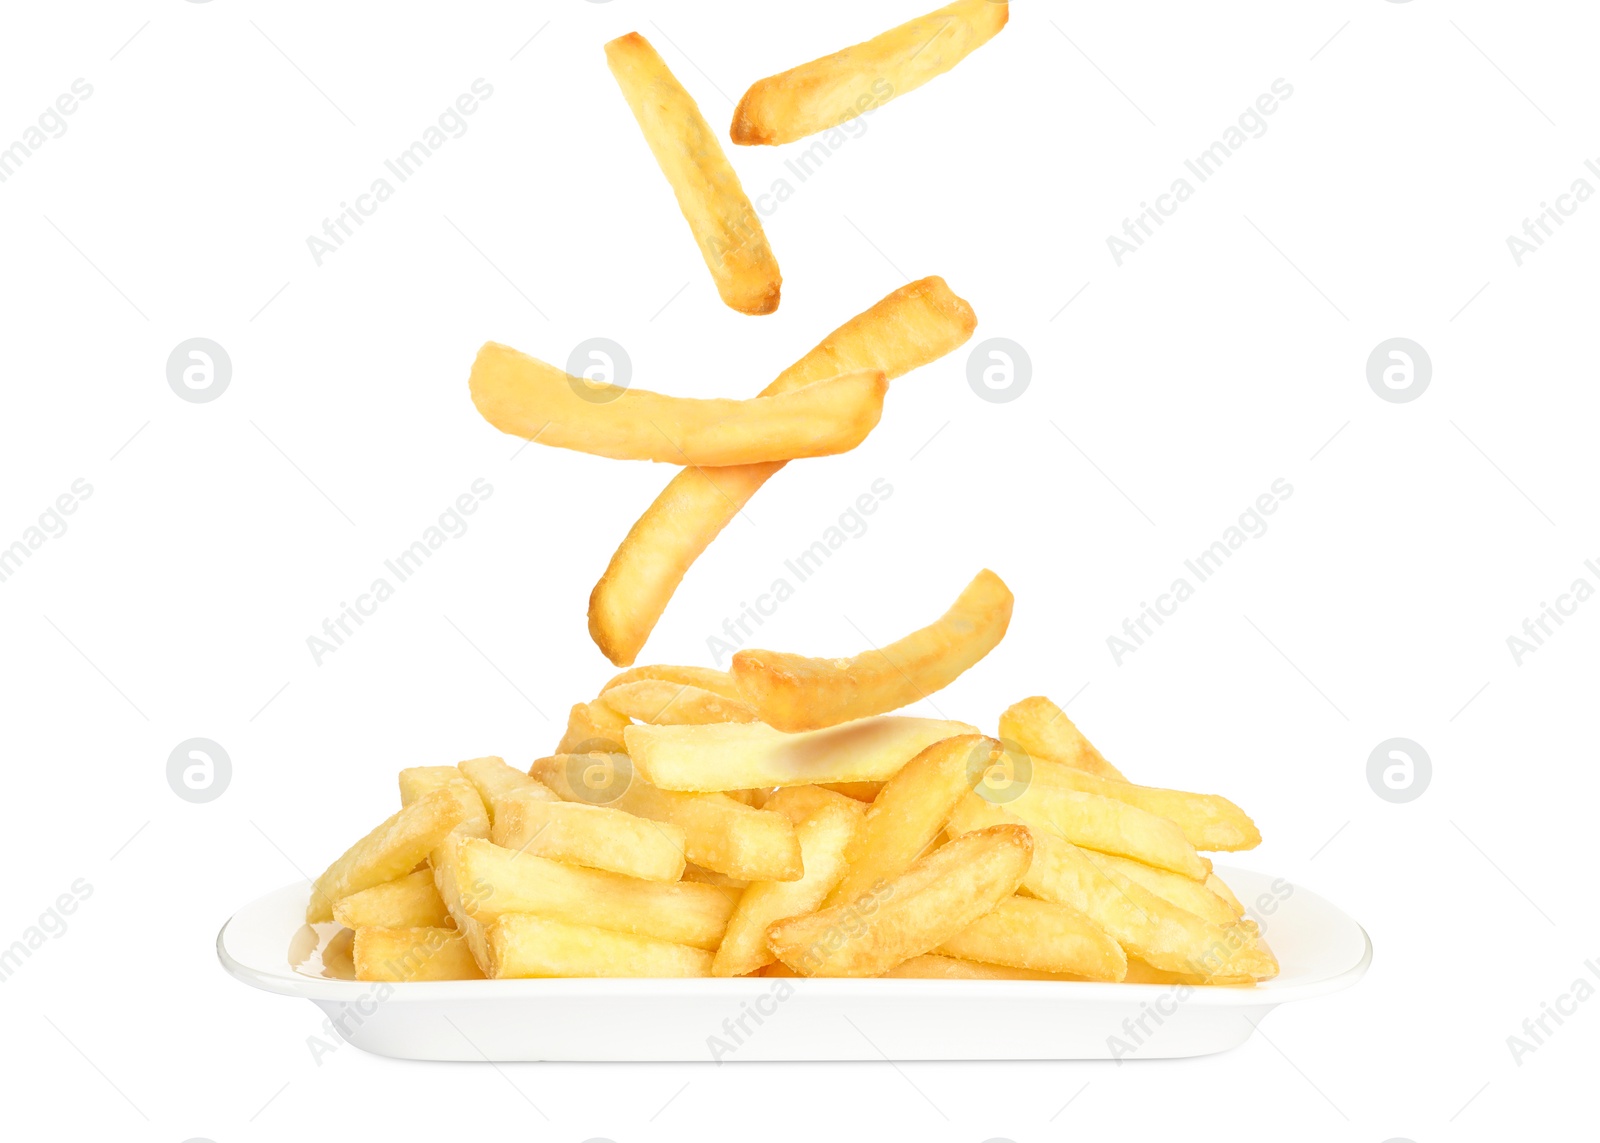 Image of Tasty French fries falling onto plate on white background